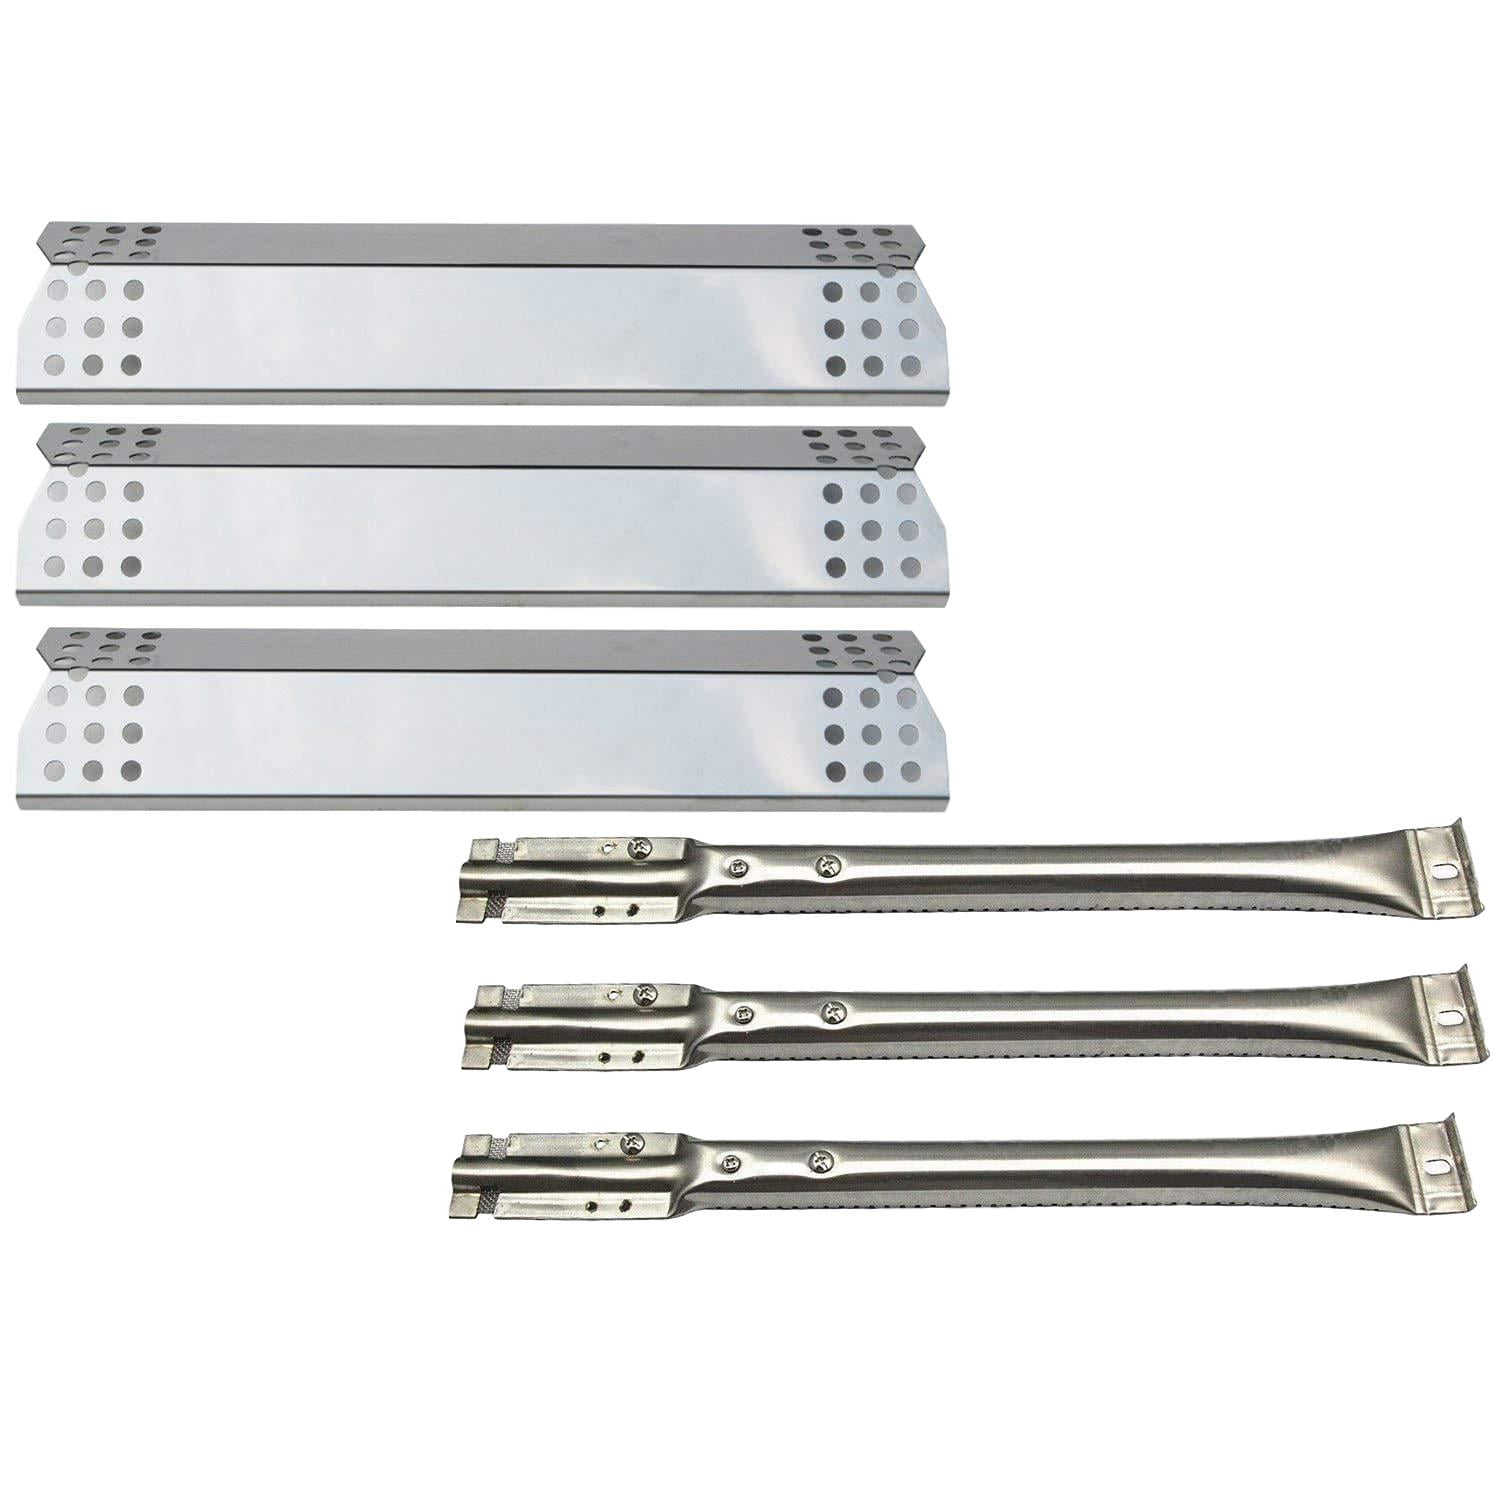 Details about   4 Pack Burners 4 Pack Heat Plates 3 Pack Cross Over Tube For Charbroil FREE SHIP 